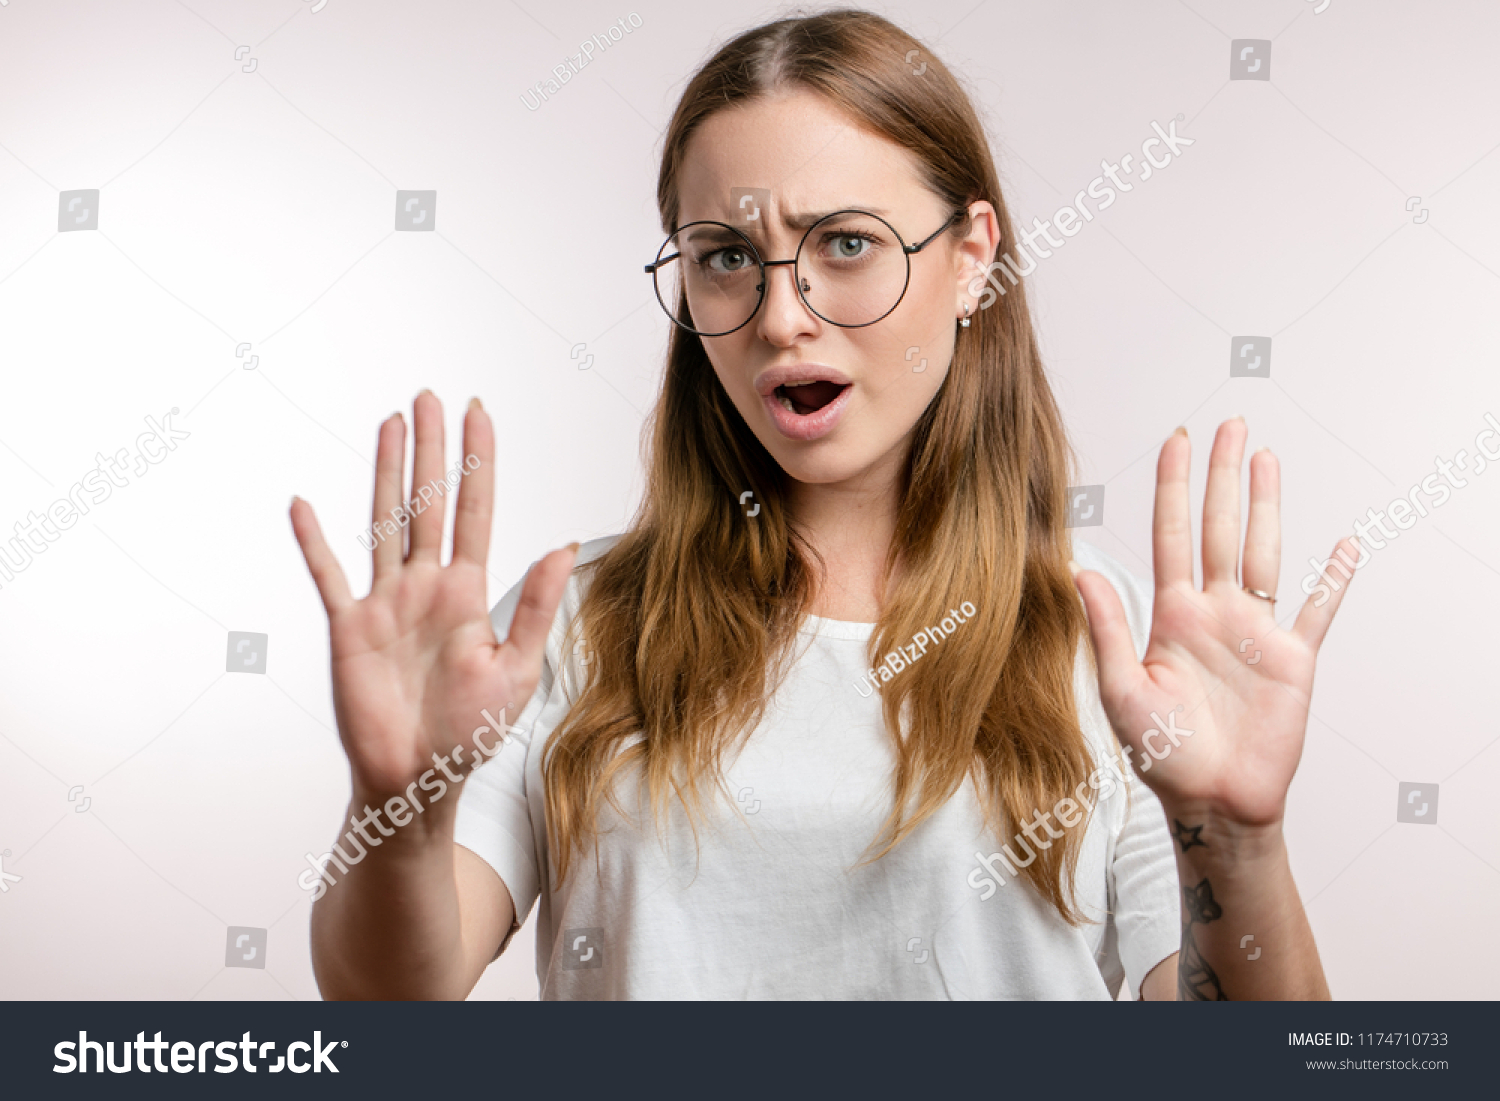 Young beautiful woman in glasses making the hand stop sign, isolated on the white background. close up photo. calm down, please. Don't worry #1174710733